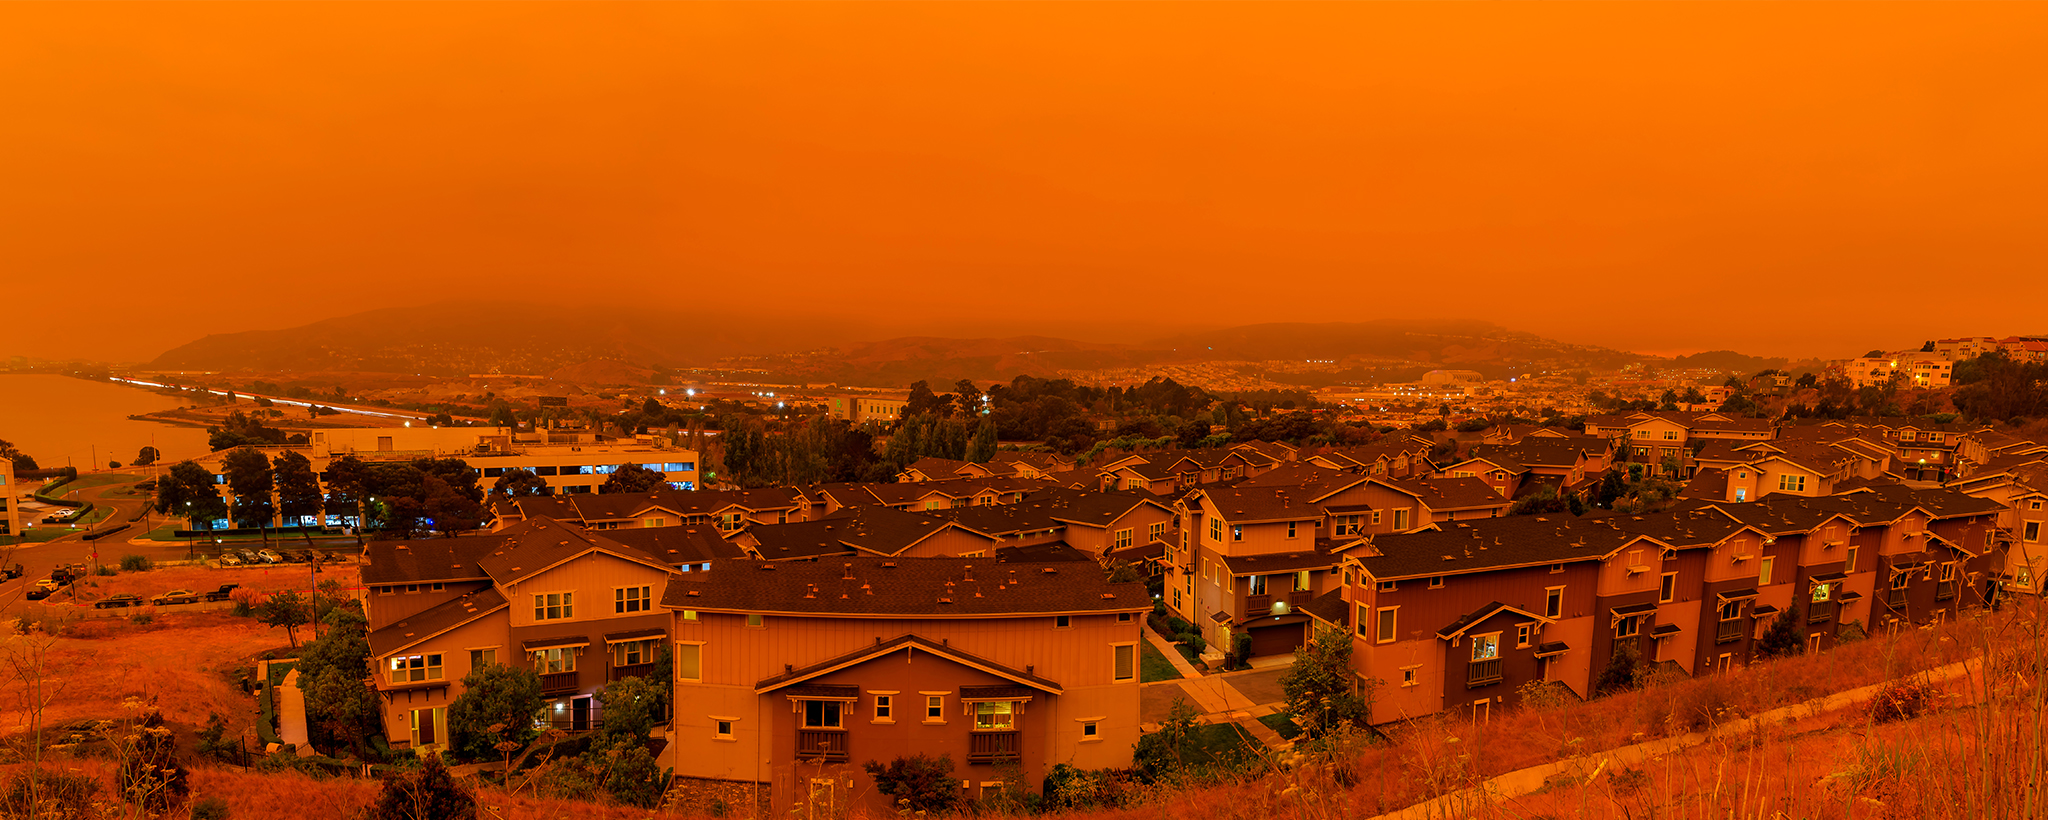 Orange haze over houses from a nearby wildfire. 